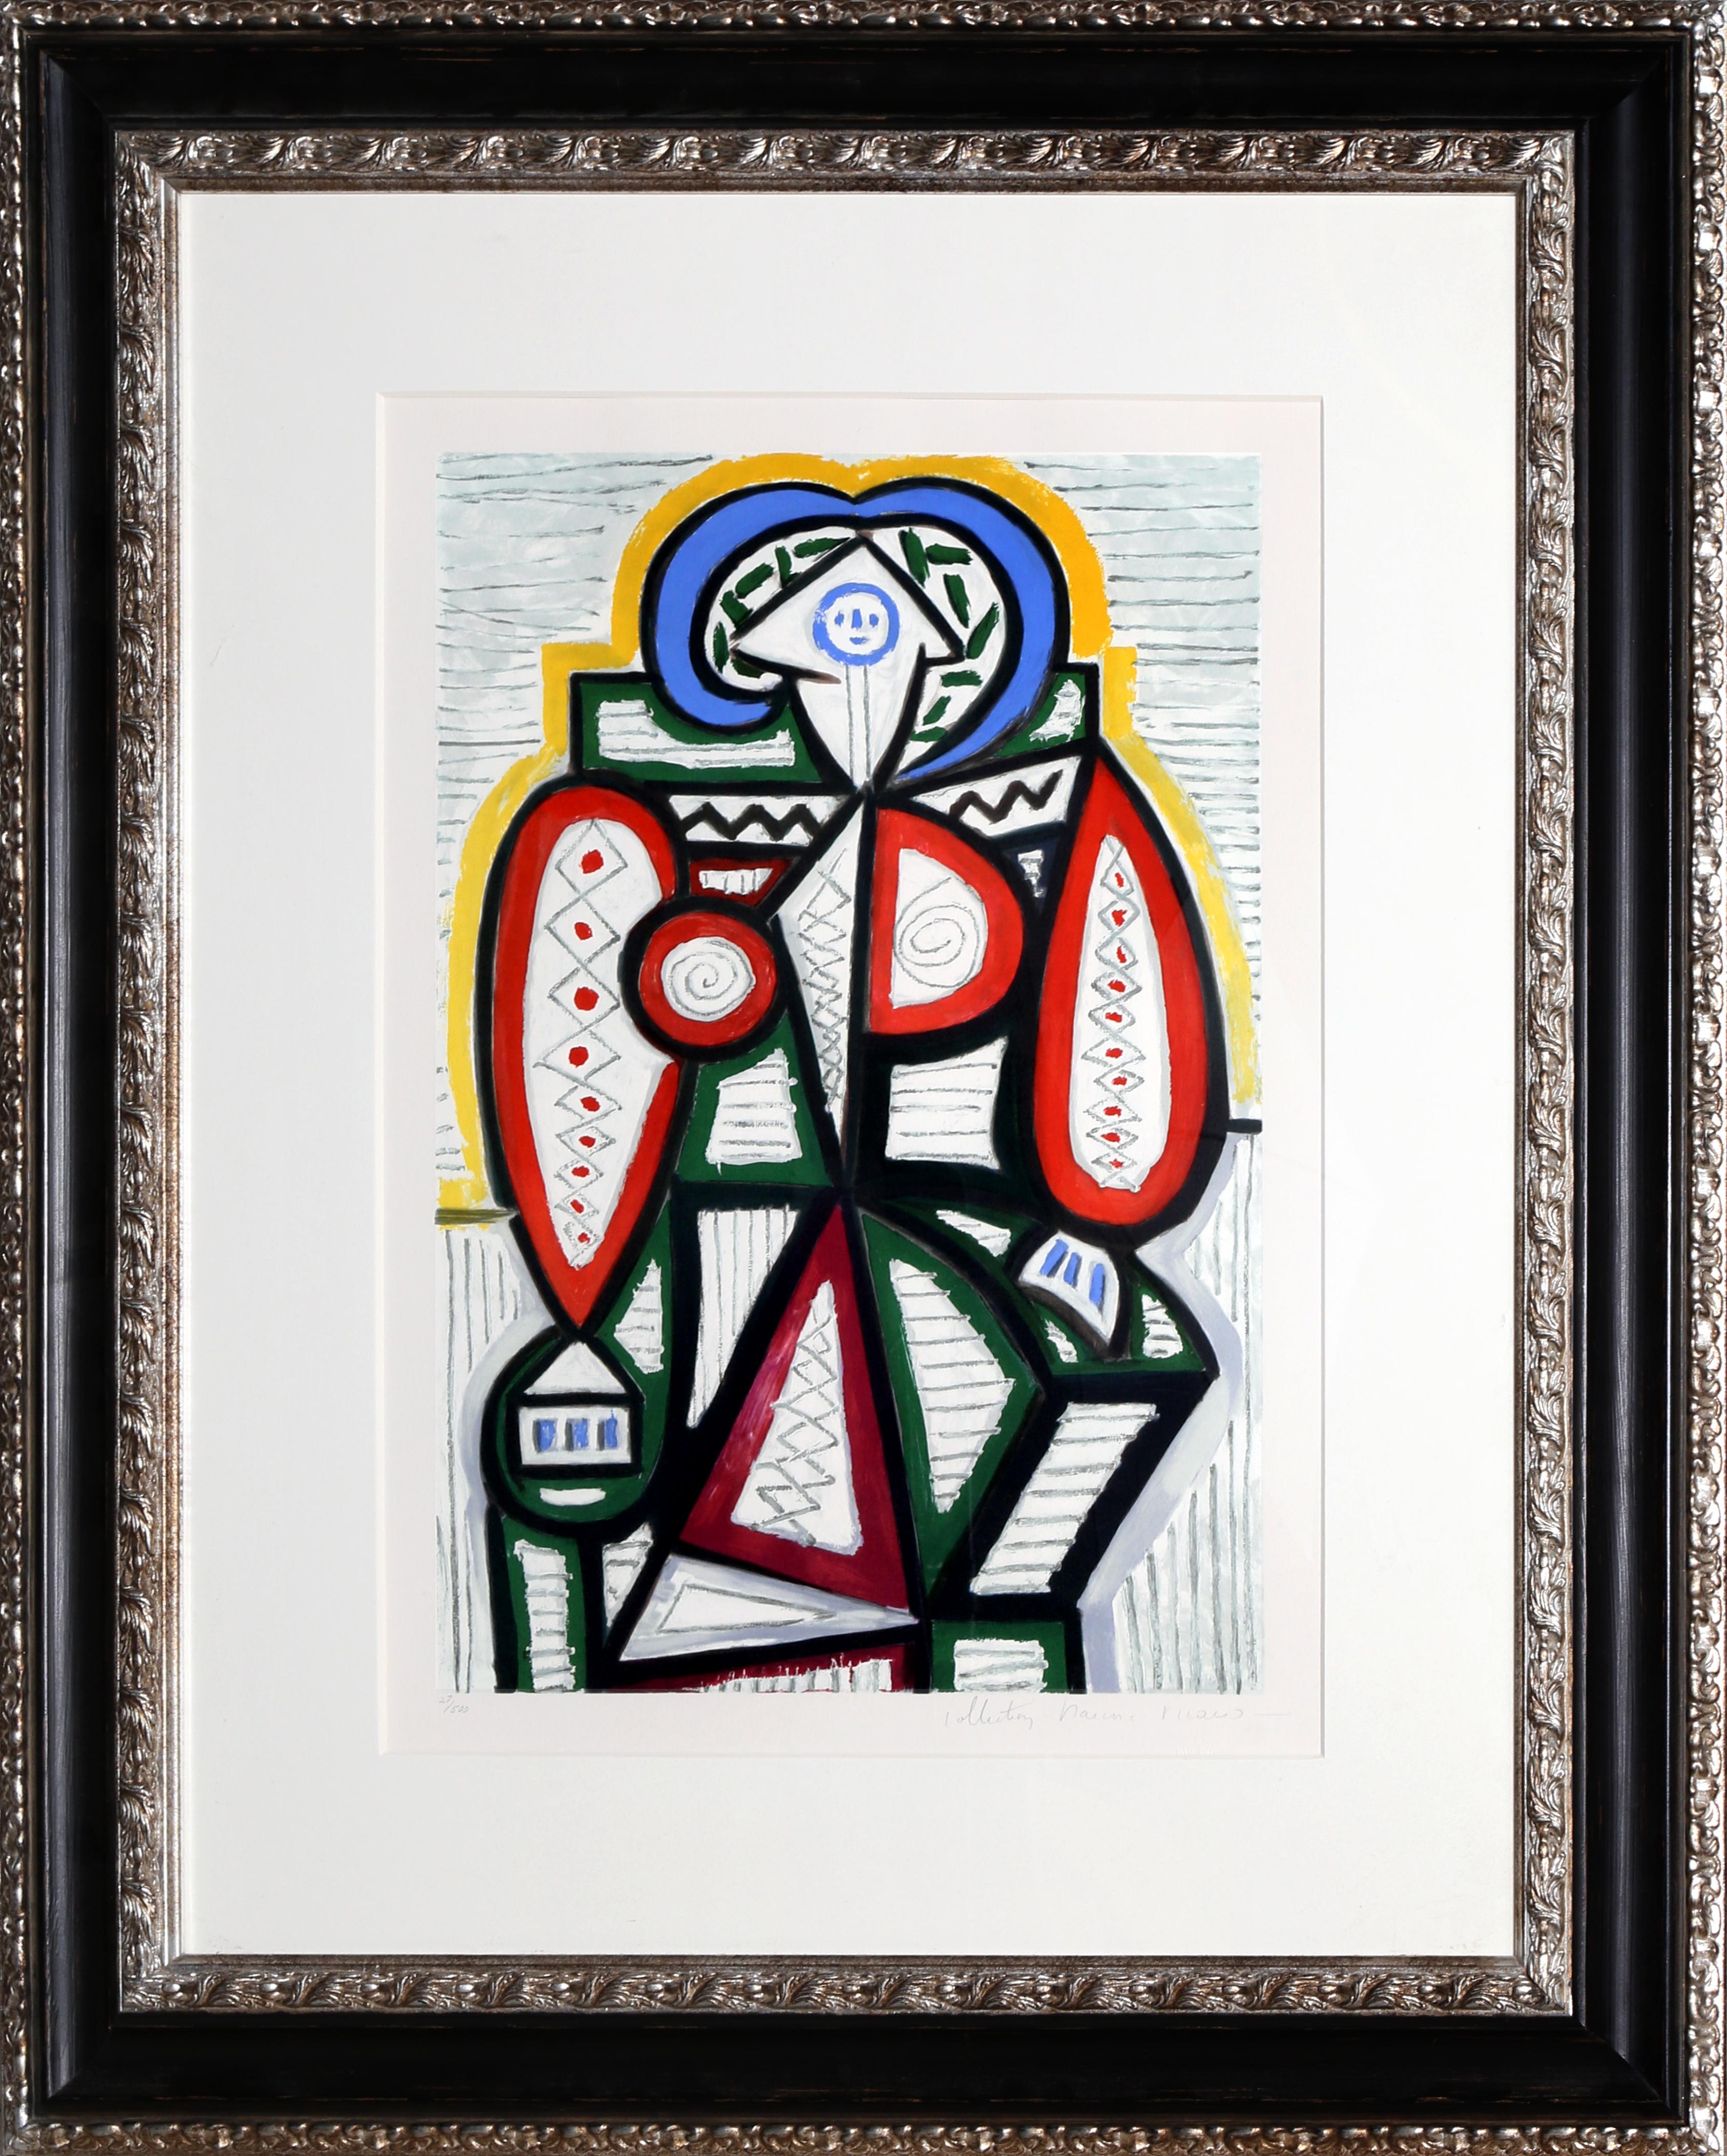 Femme Assise, Cubist Lithograph by Pablo Picasso